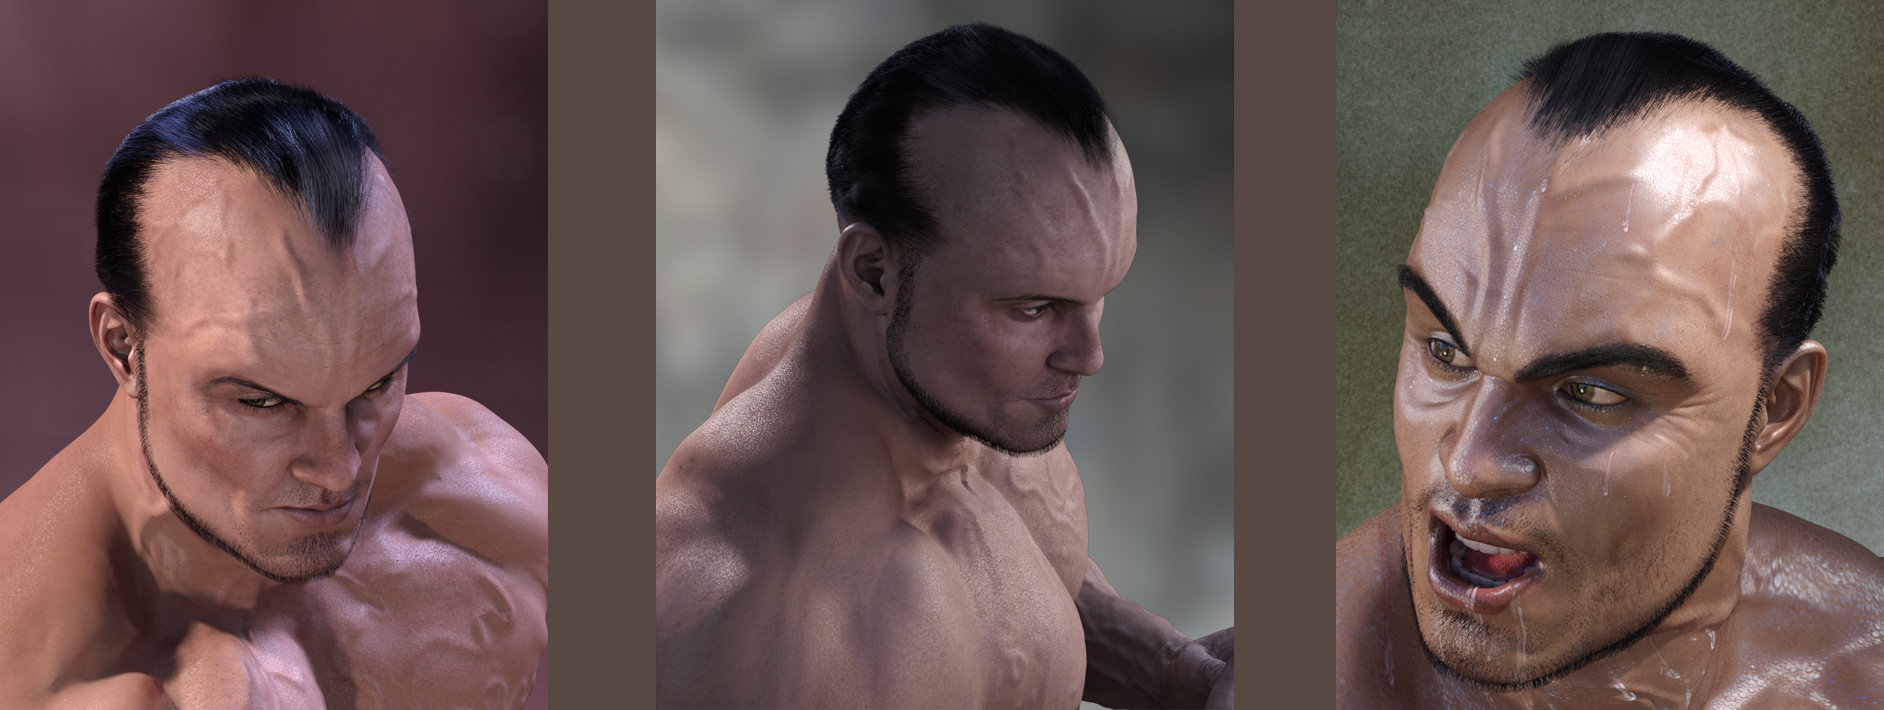 Deep Hairline for Genesis 3 by: SimonWM, 3D Models by Daz 3D